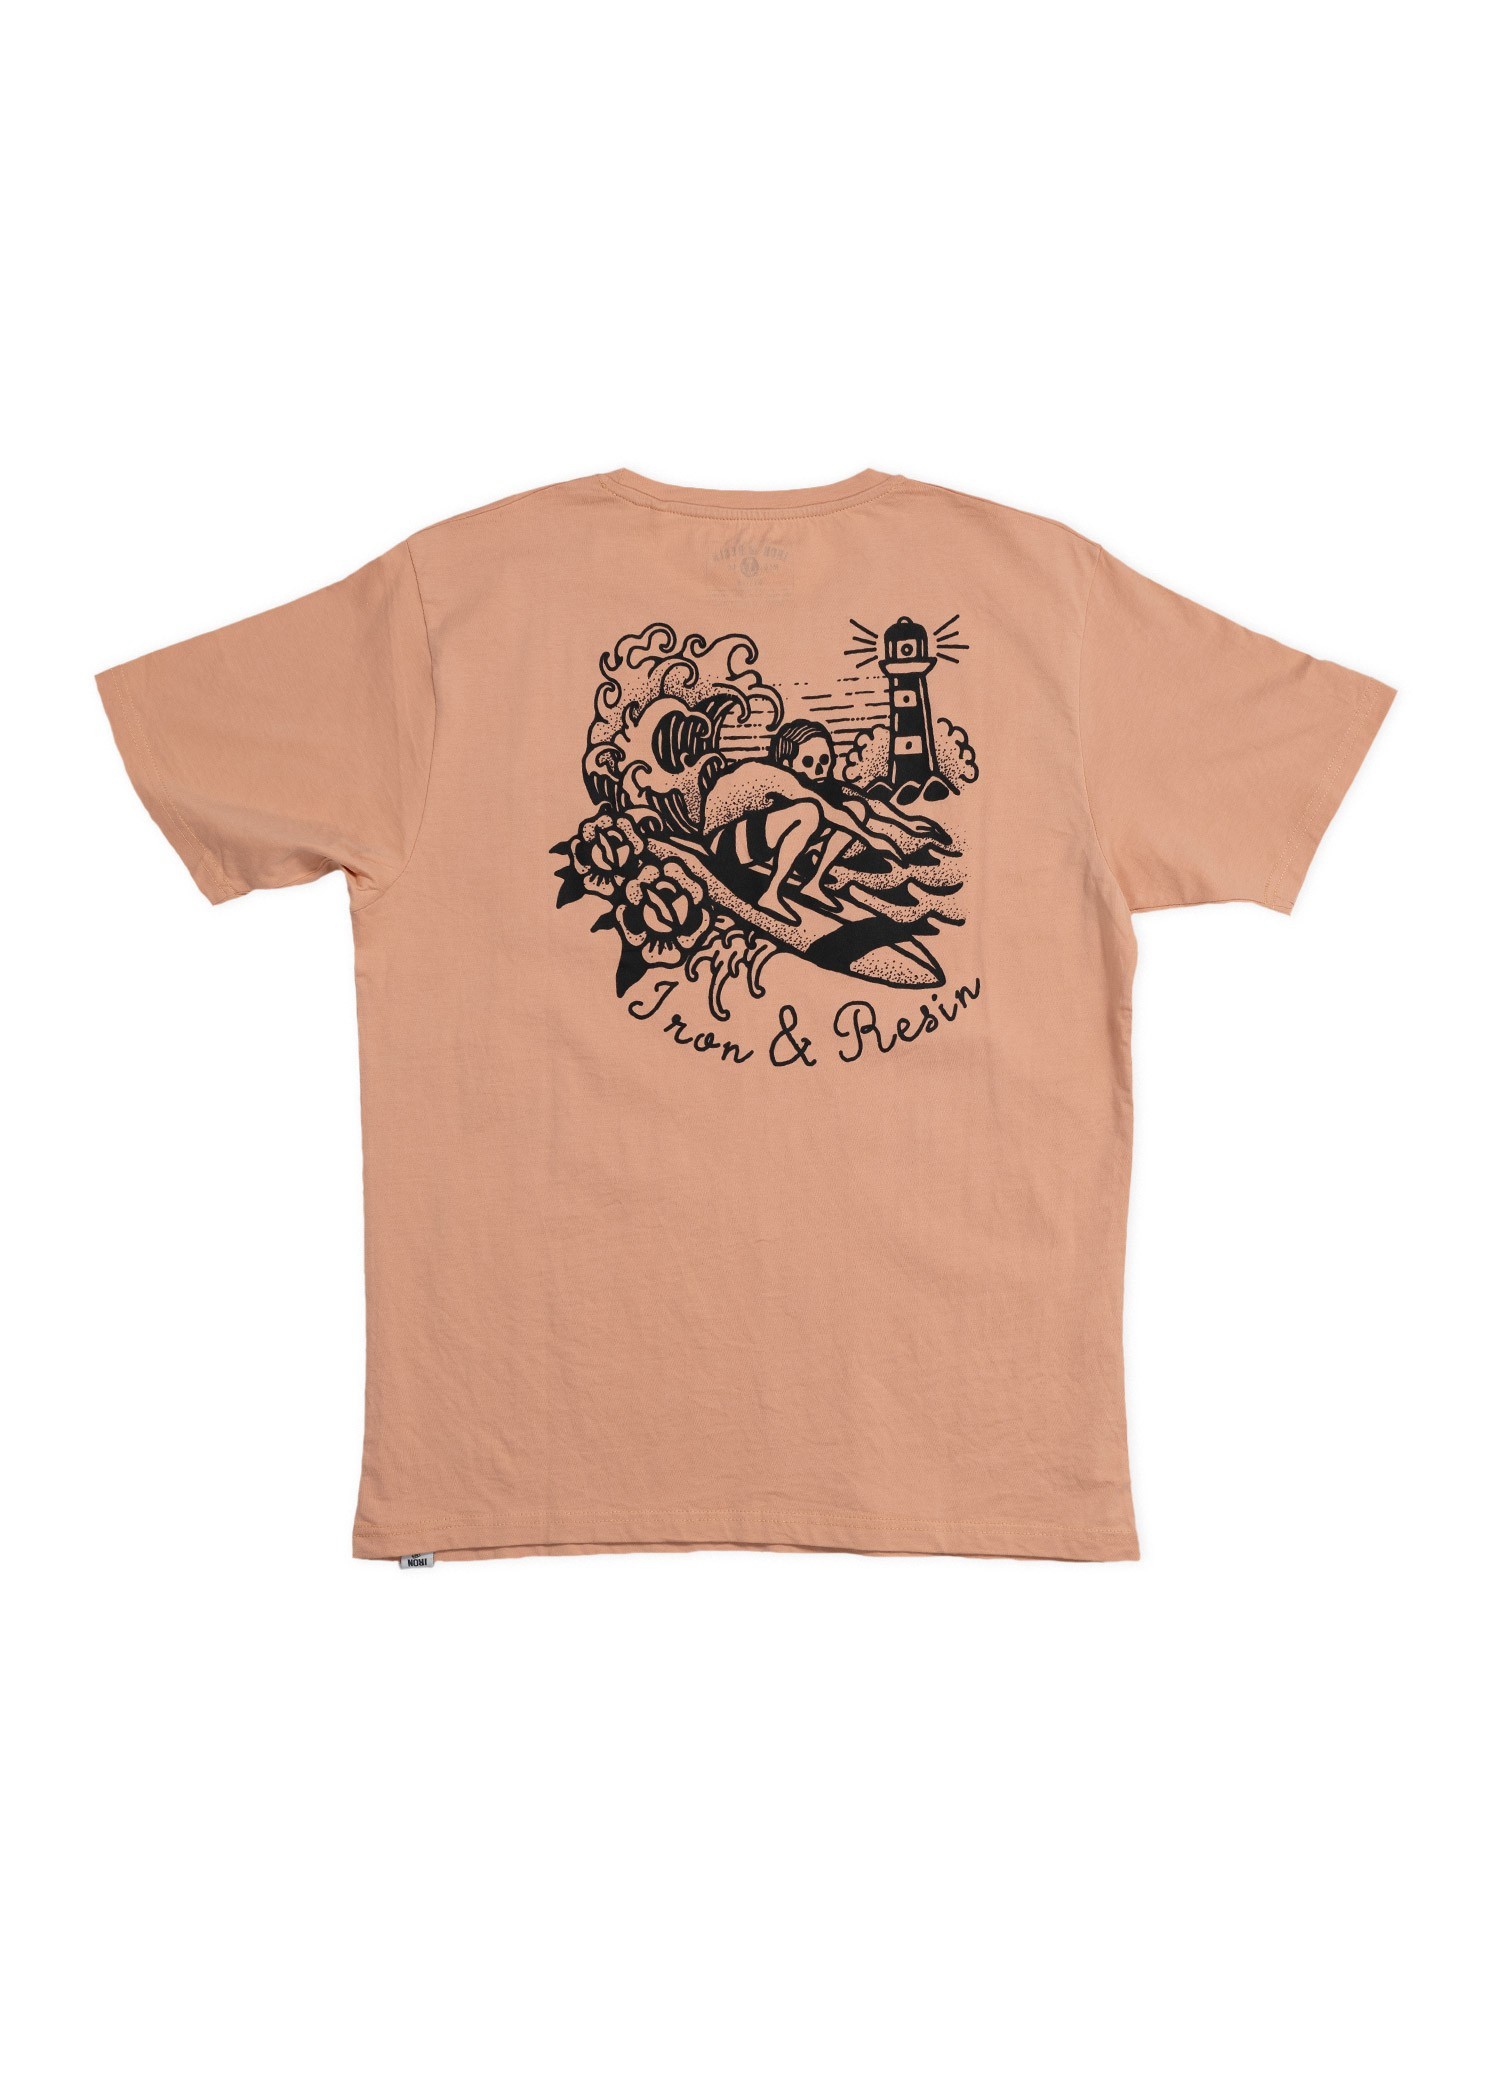 Surf ink - T-shirt homme homme - IRON & RESIN